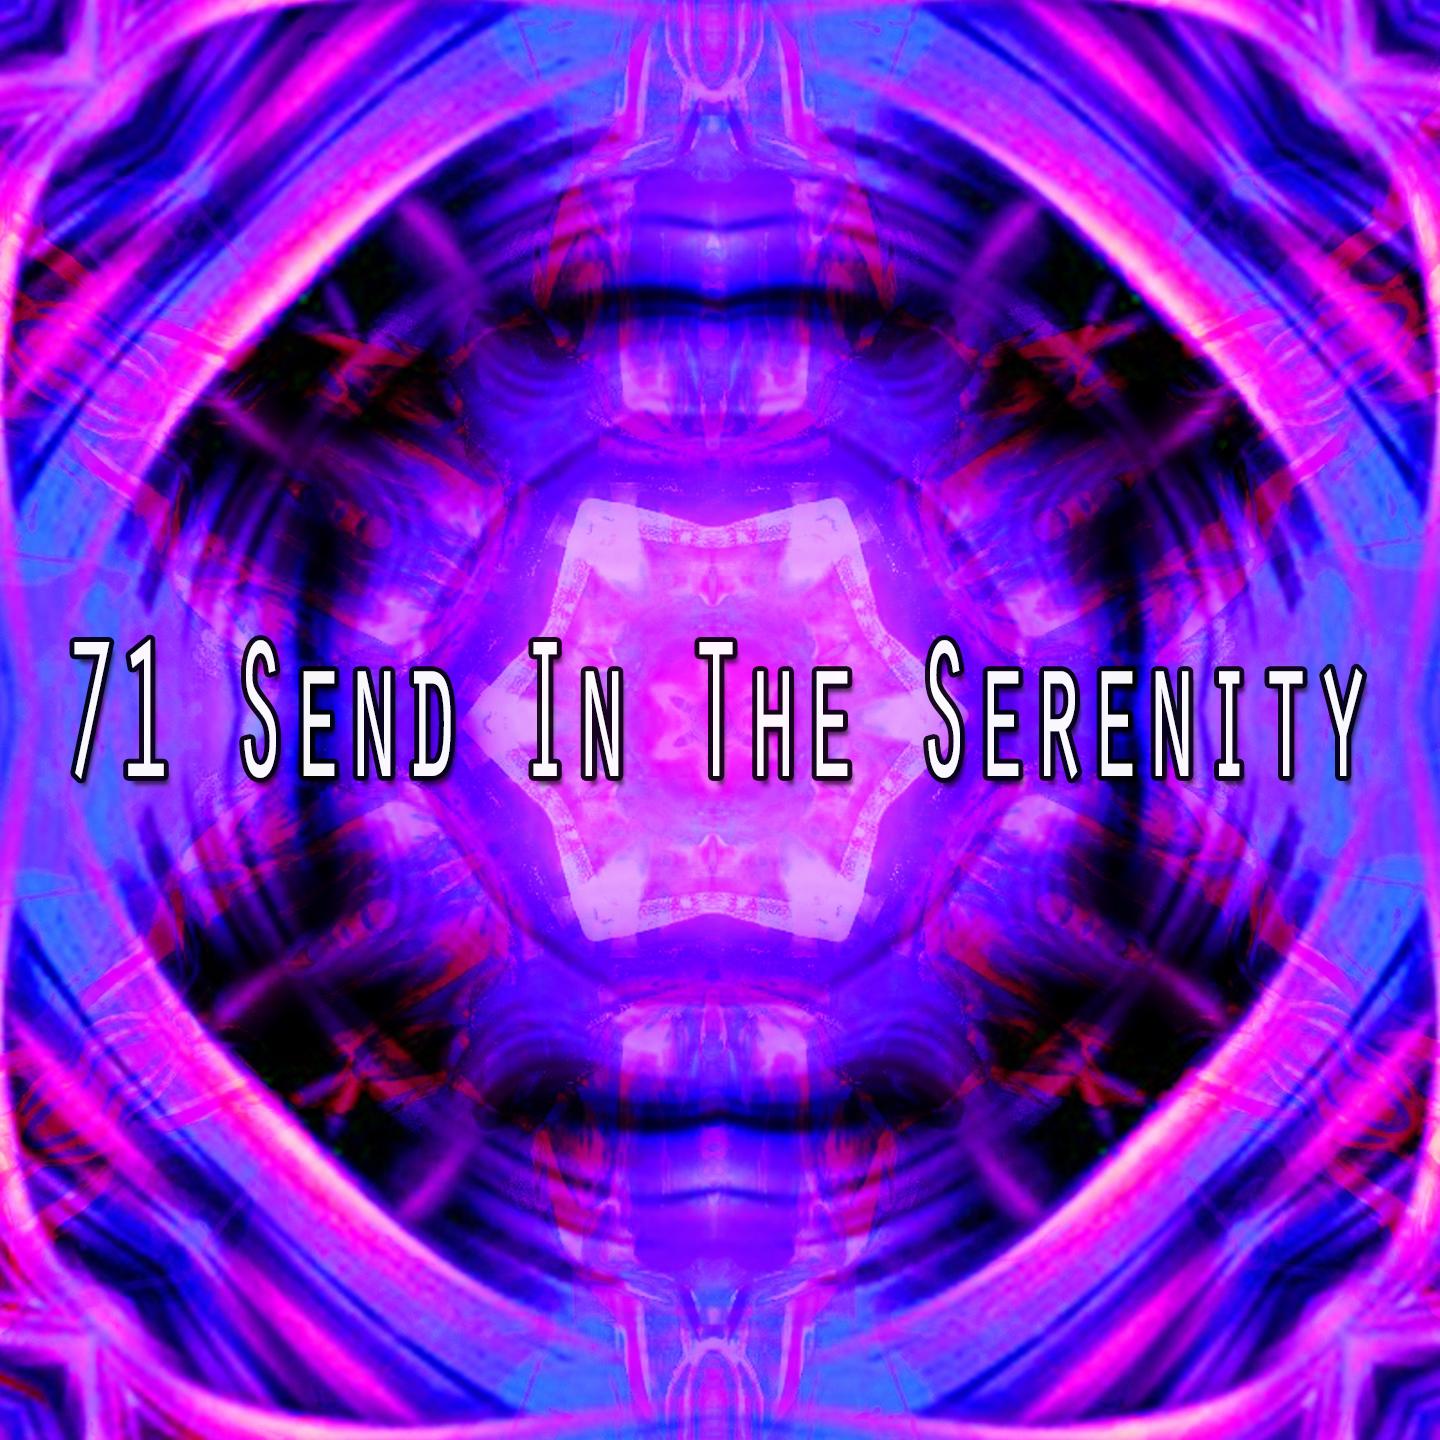 71 Send in the Serenity